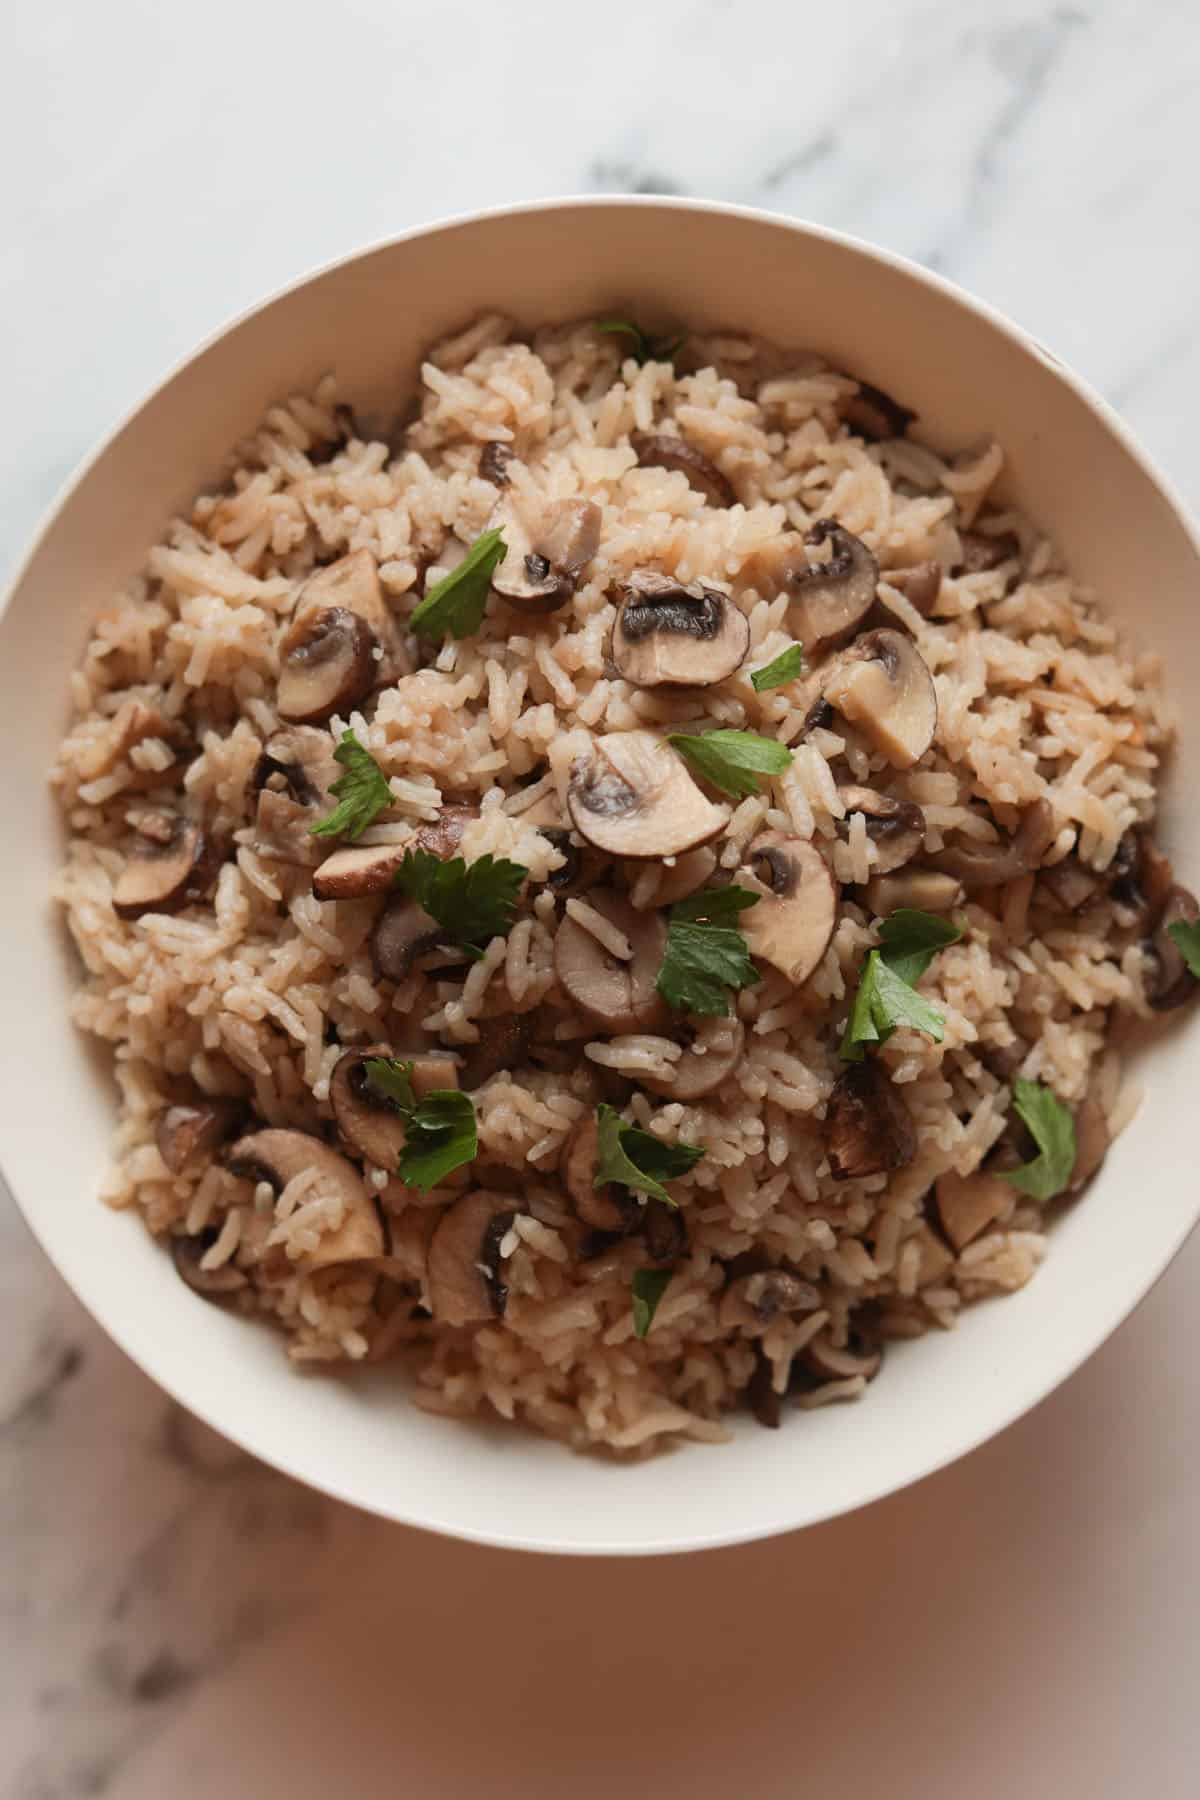 Bowl of white rice with sliced mushrooms, garnished with parsley.